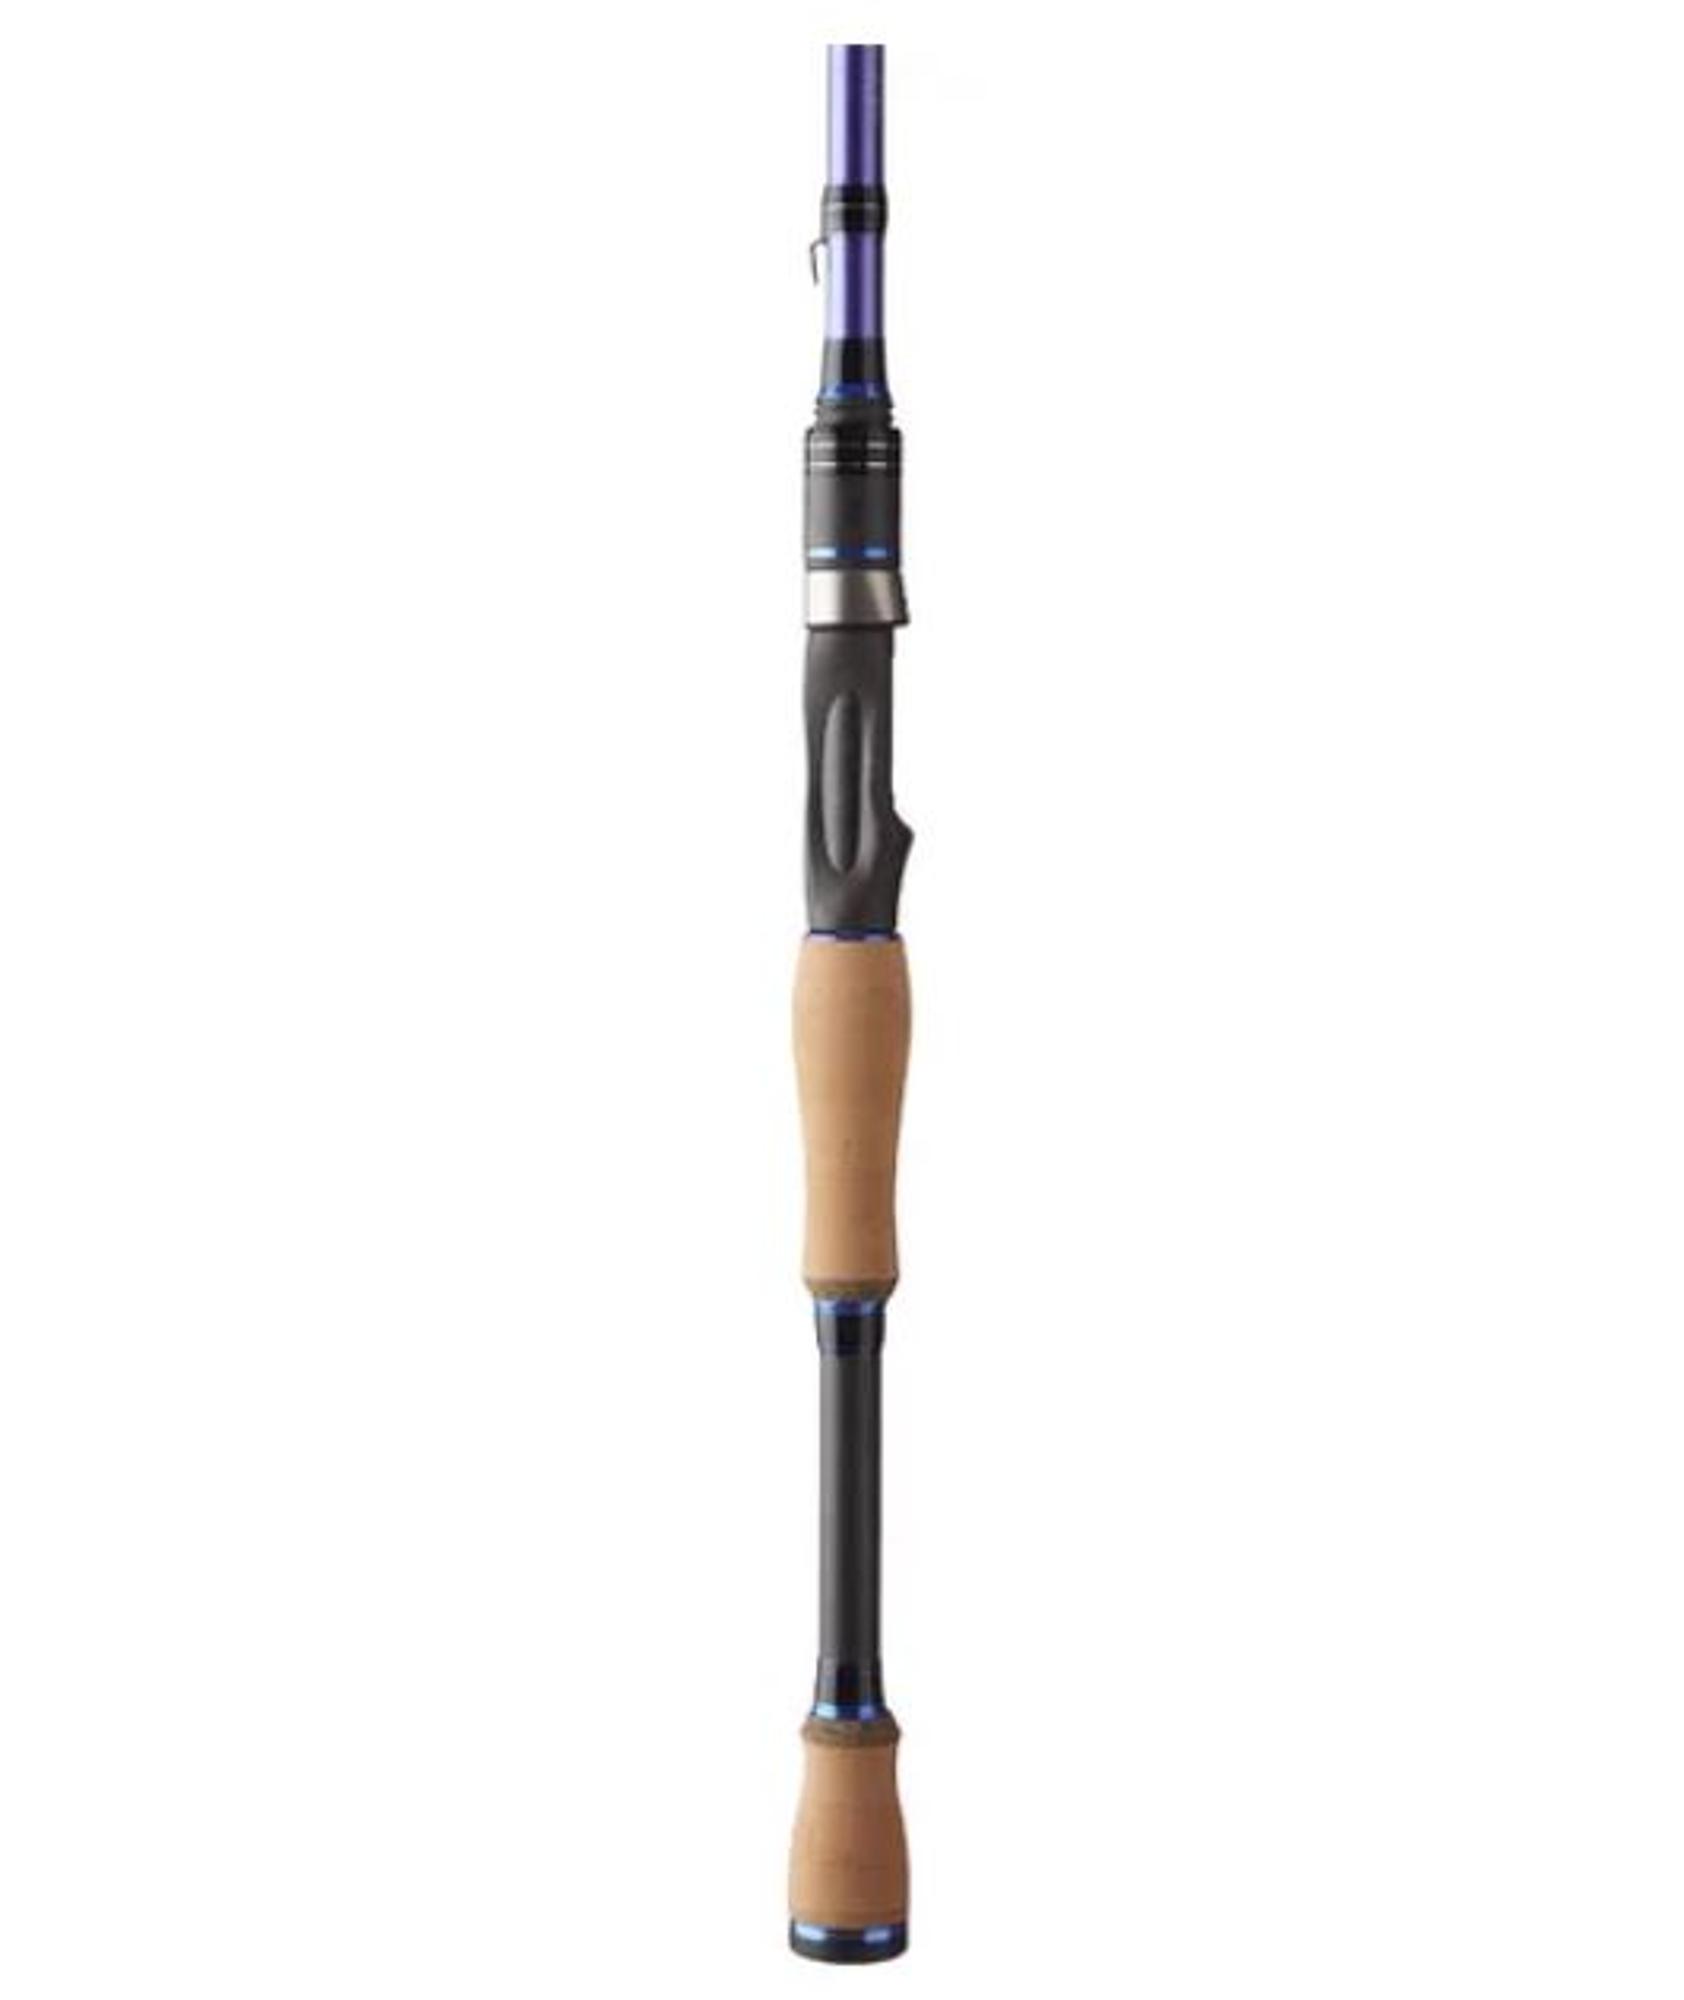 Endurance 703 MEFF SPIN 7ft Medium Extra Fast | 850033706048 | POWELL RODS | Fishing | Rods 